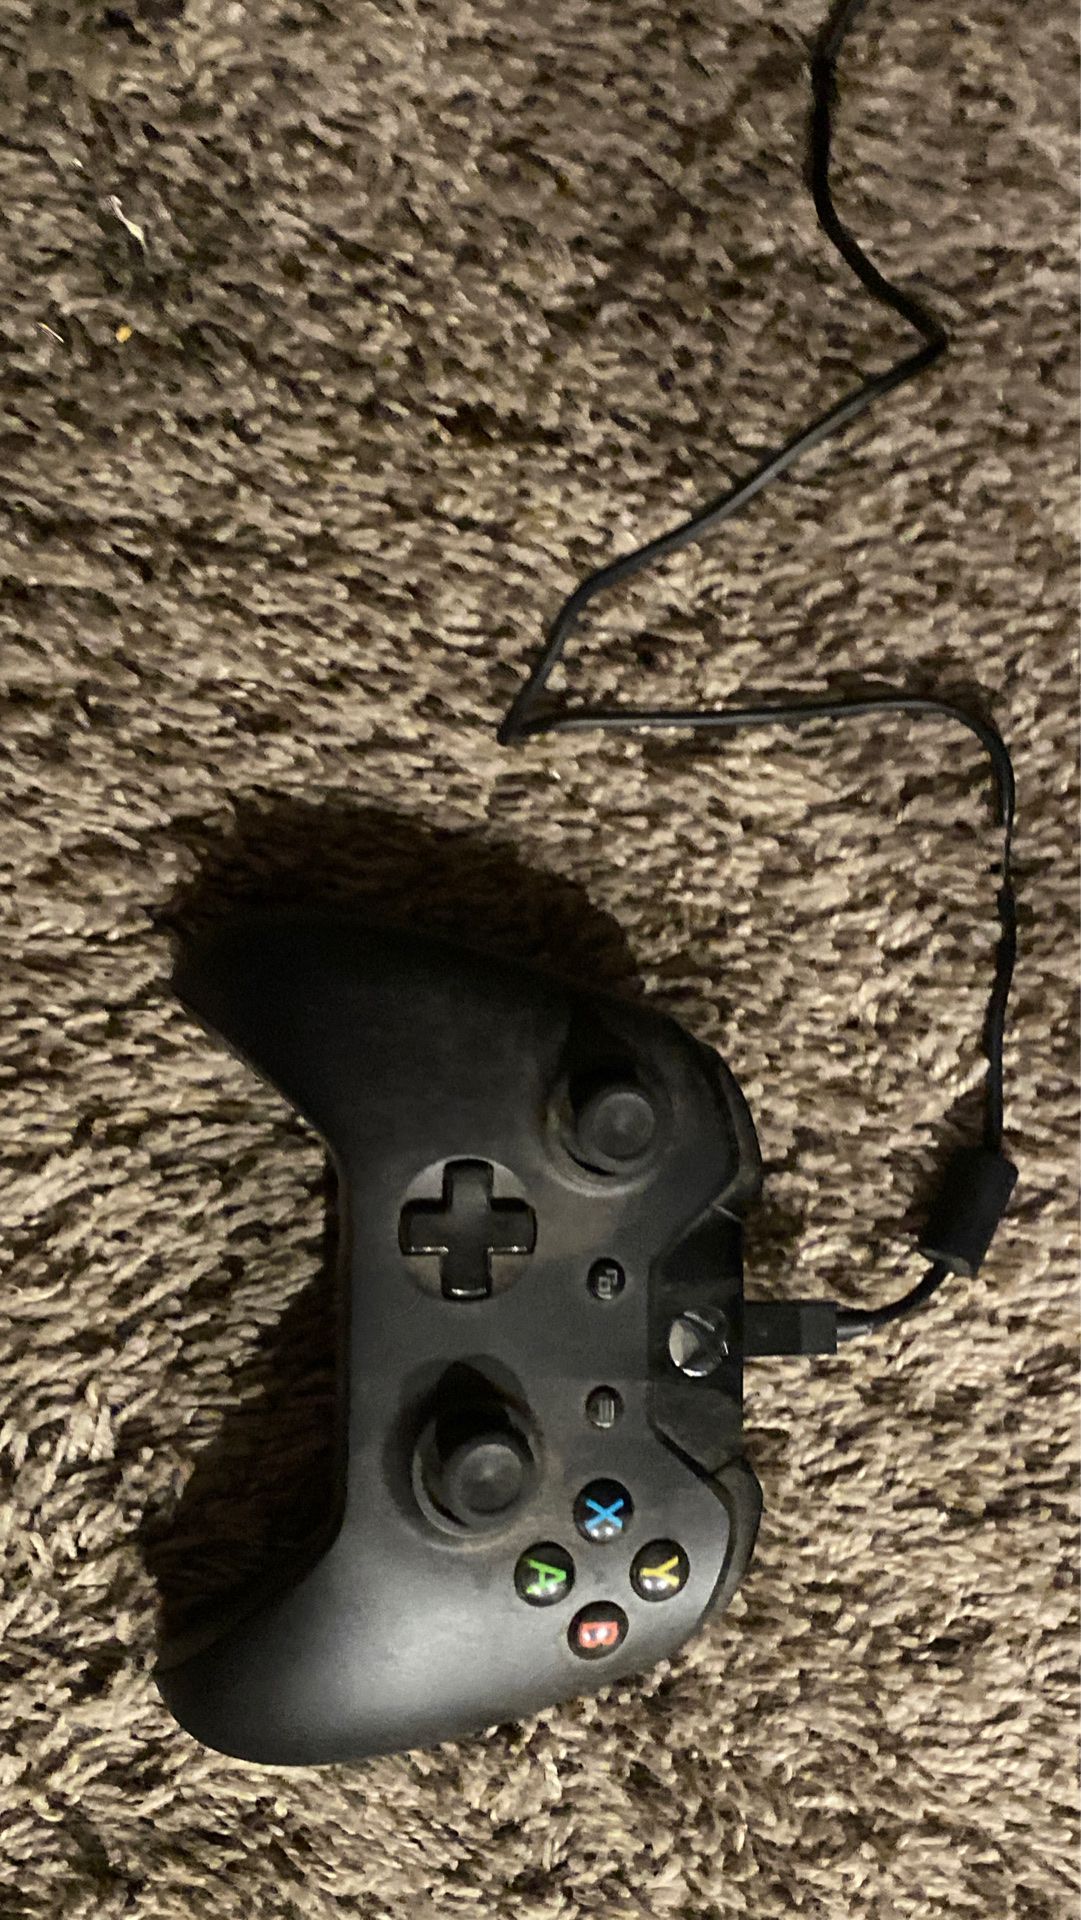 Rechargeable Xbox one controller. Barely used